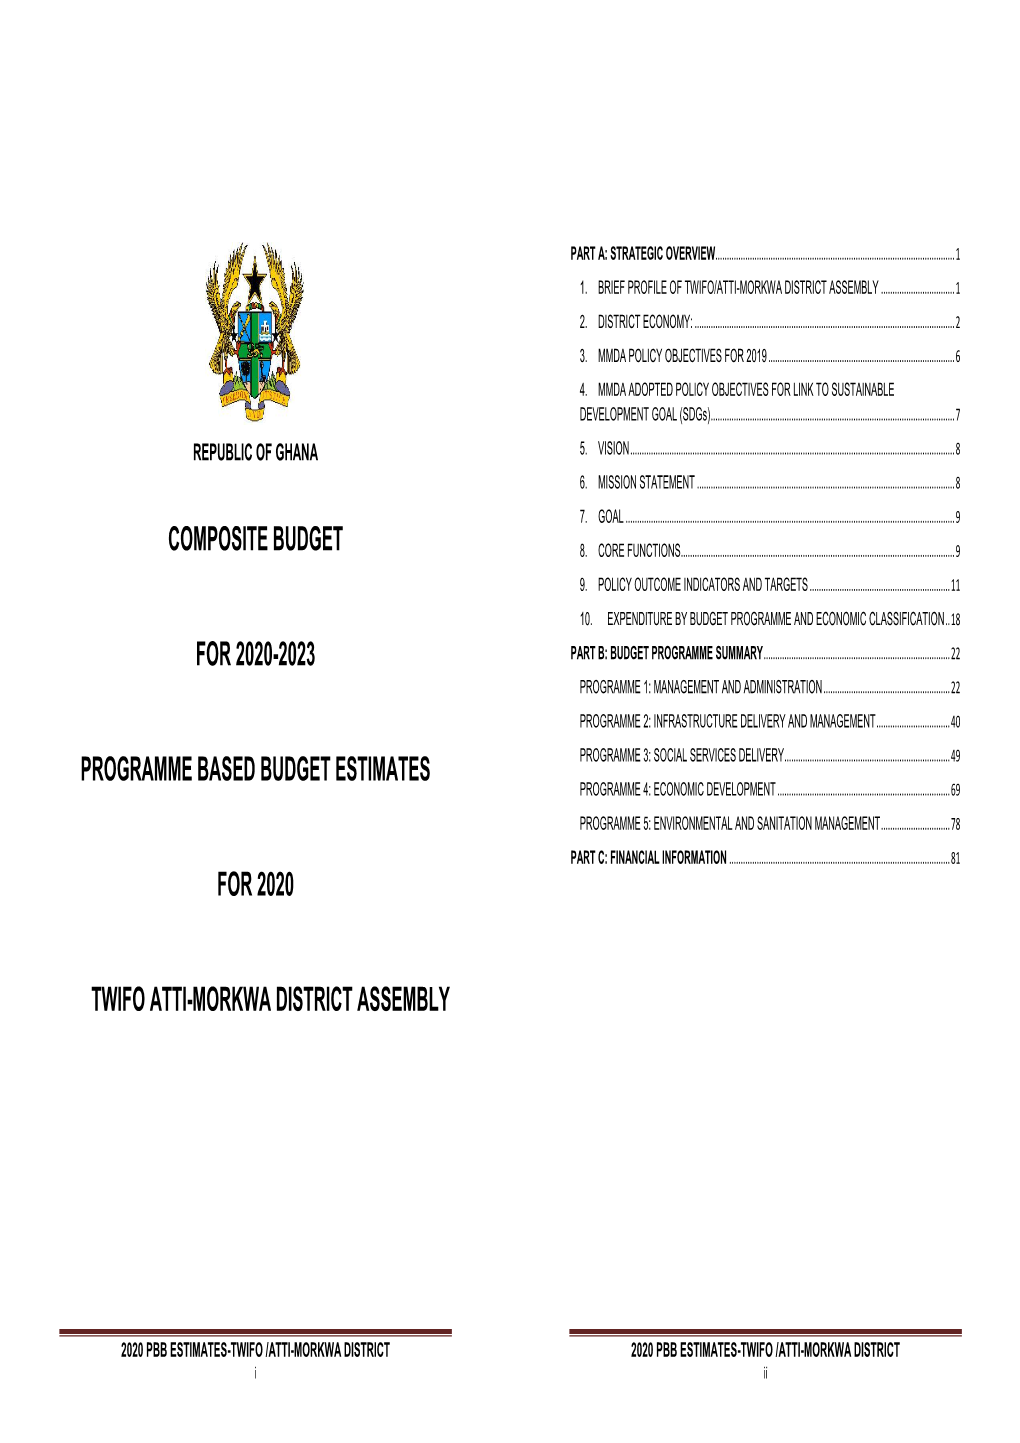 Composite Budget for 2020-2023 Programme Based Budget Estimates for 2020 Twifo Atti-Morkwa District Assembly